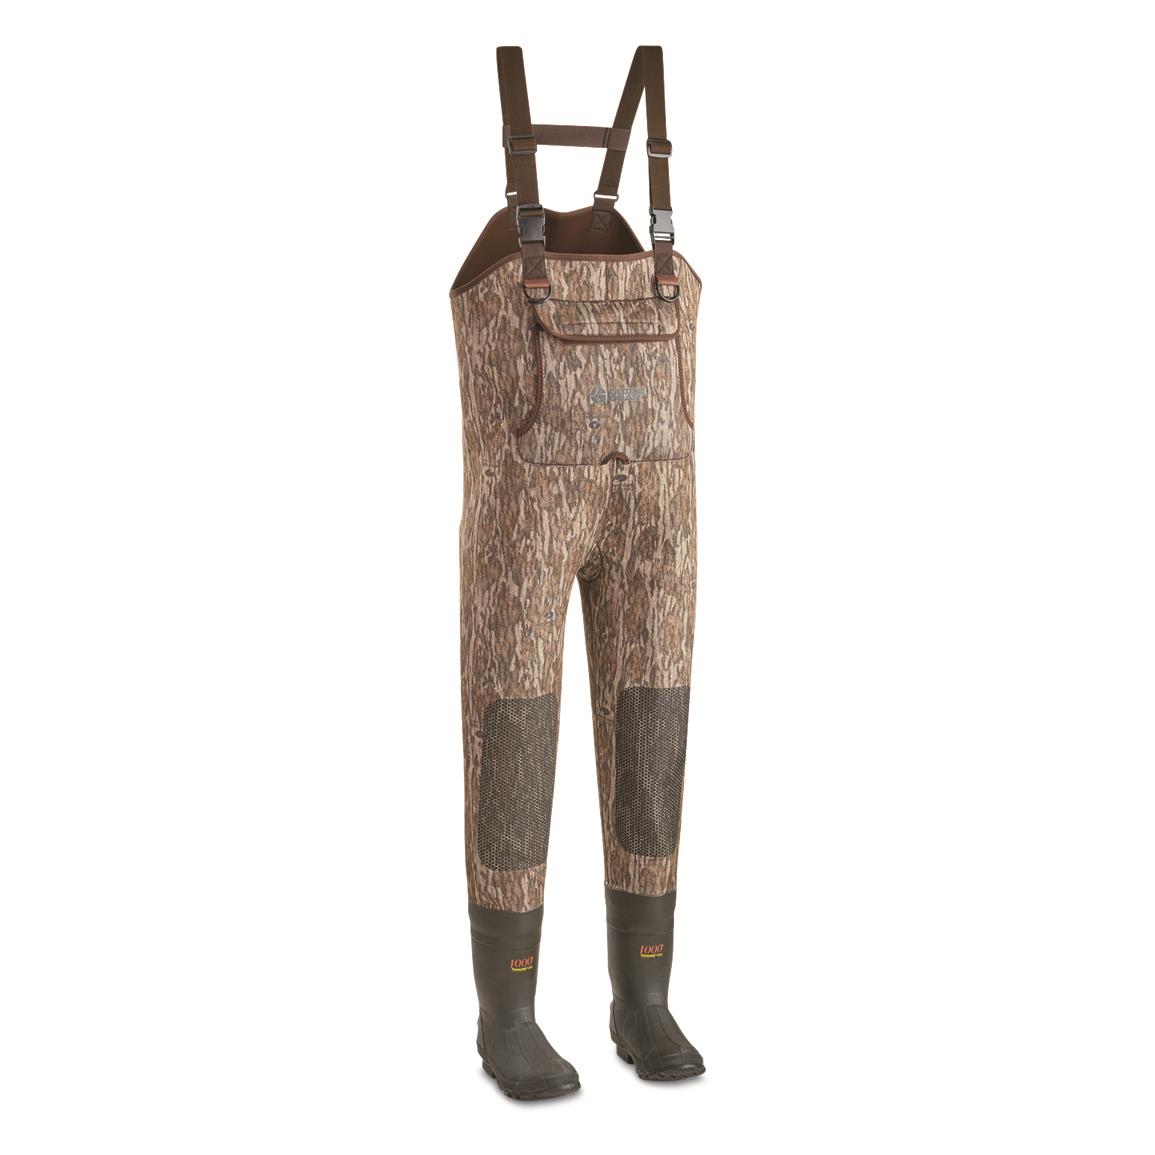 Guide Gear Men's Insulated Hunting Chest Waders, 1,000-gram, Stout Sizes, Mossy Oak Bottomland®